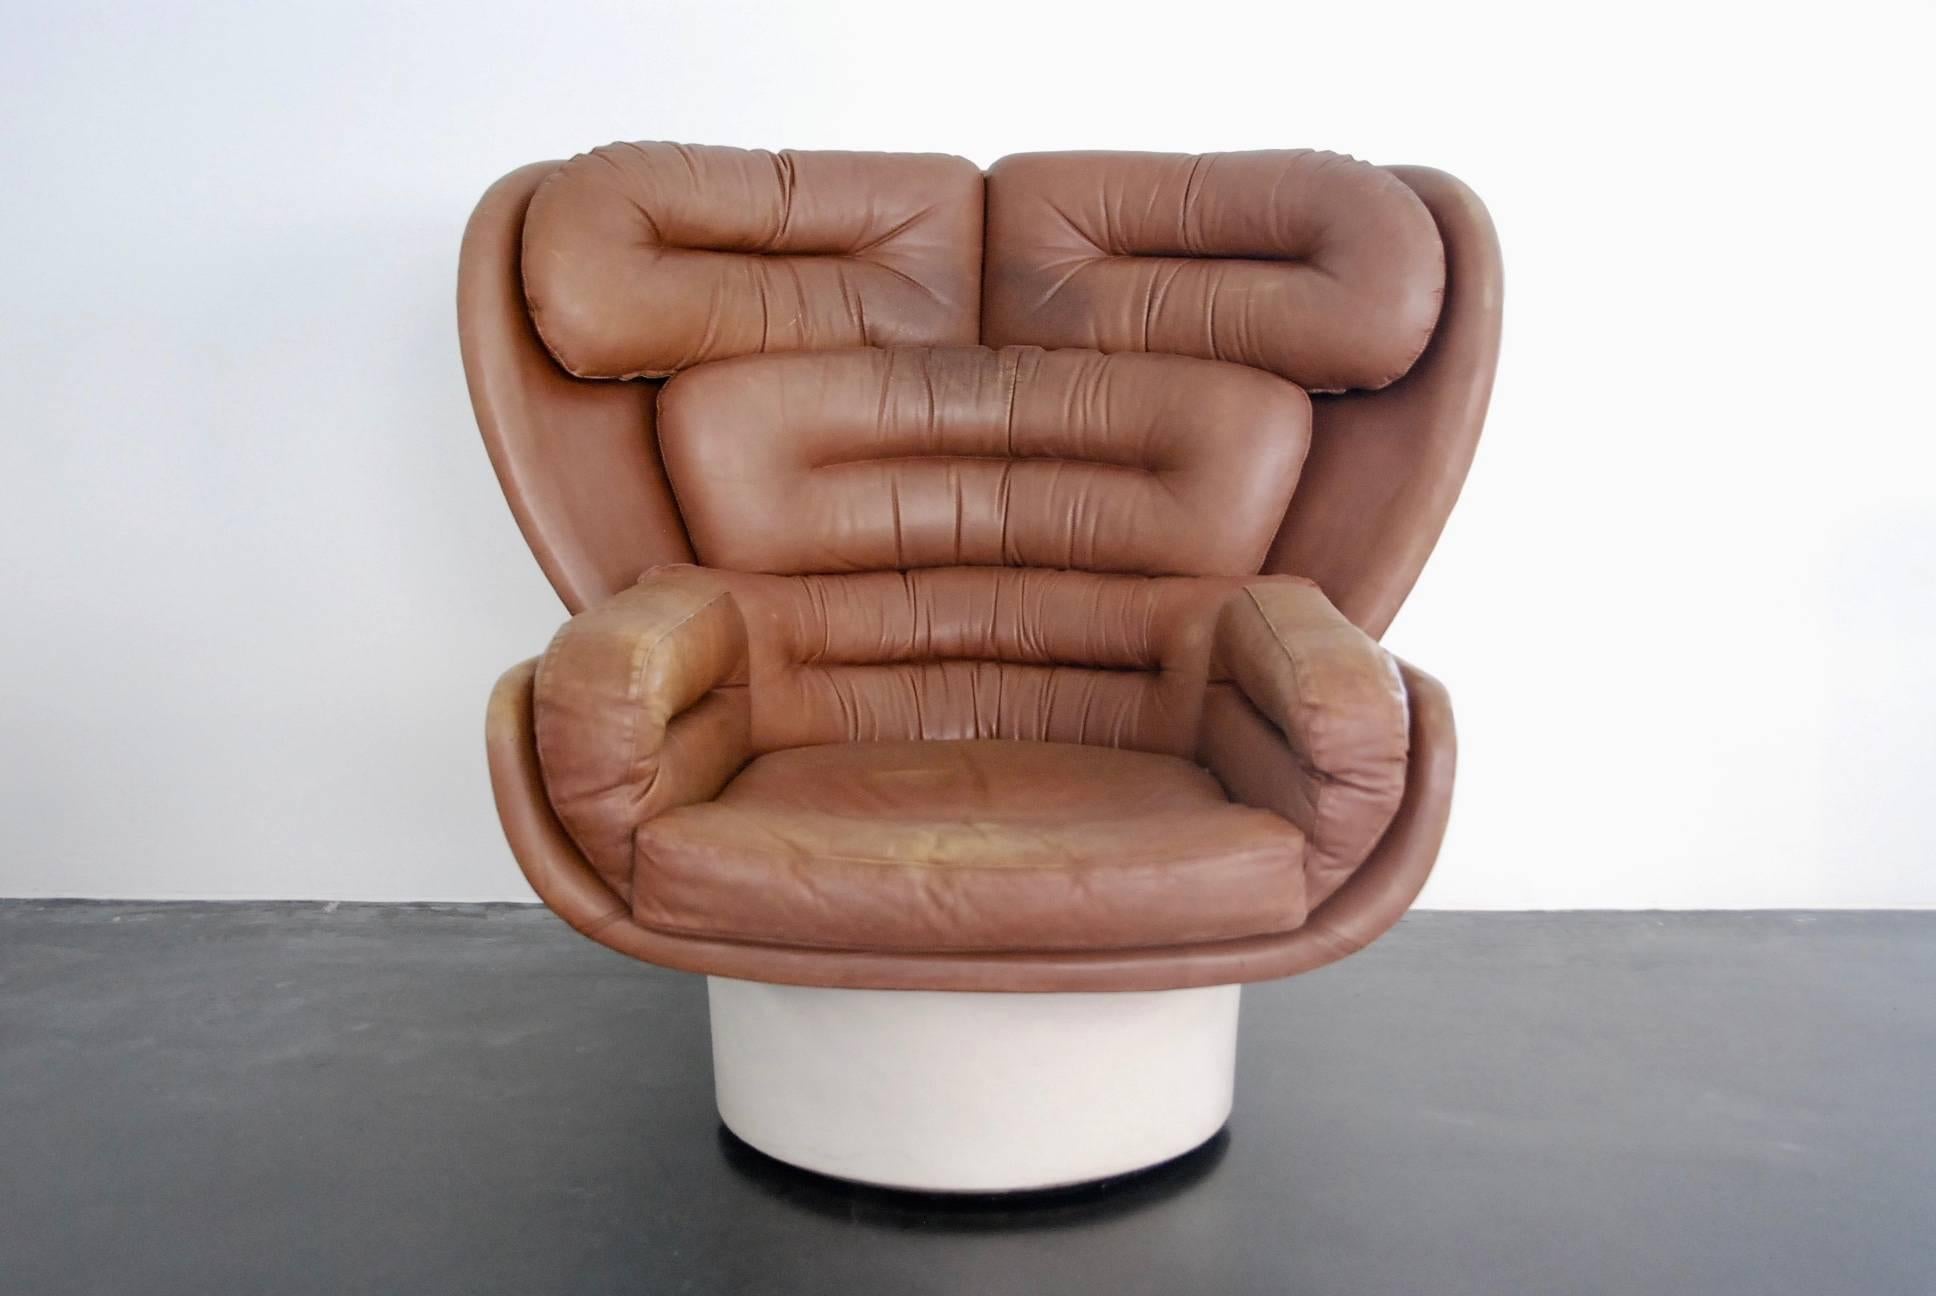 Seat designed by Joe Colombo manufactured by Comfort, Italy, 1963.
Very decorative chair with swivel base. All original condition. leather original cognac color.